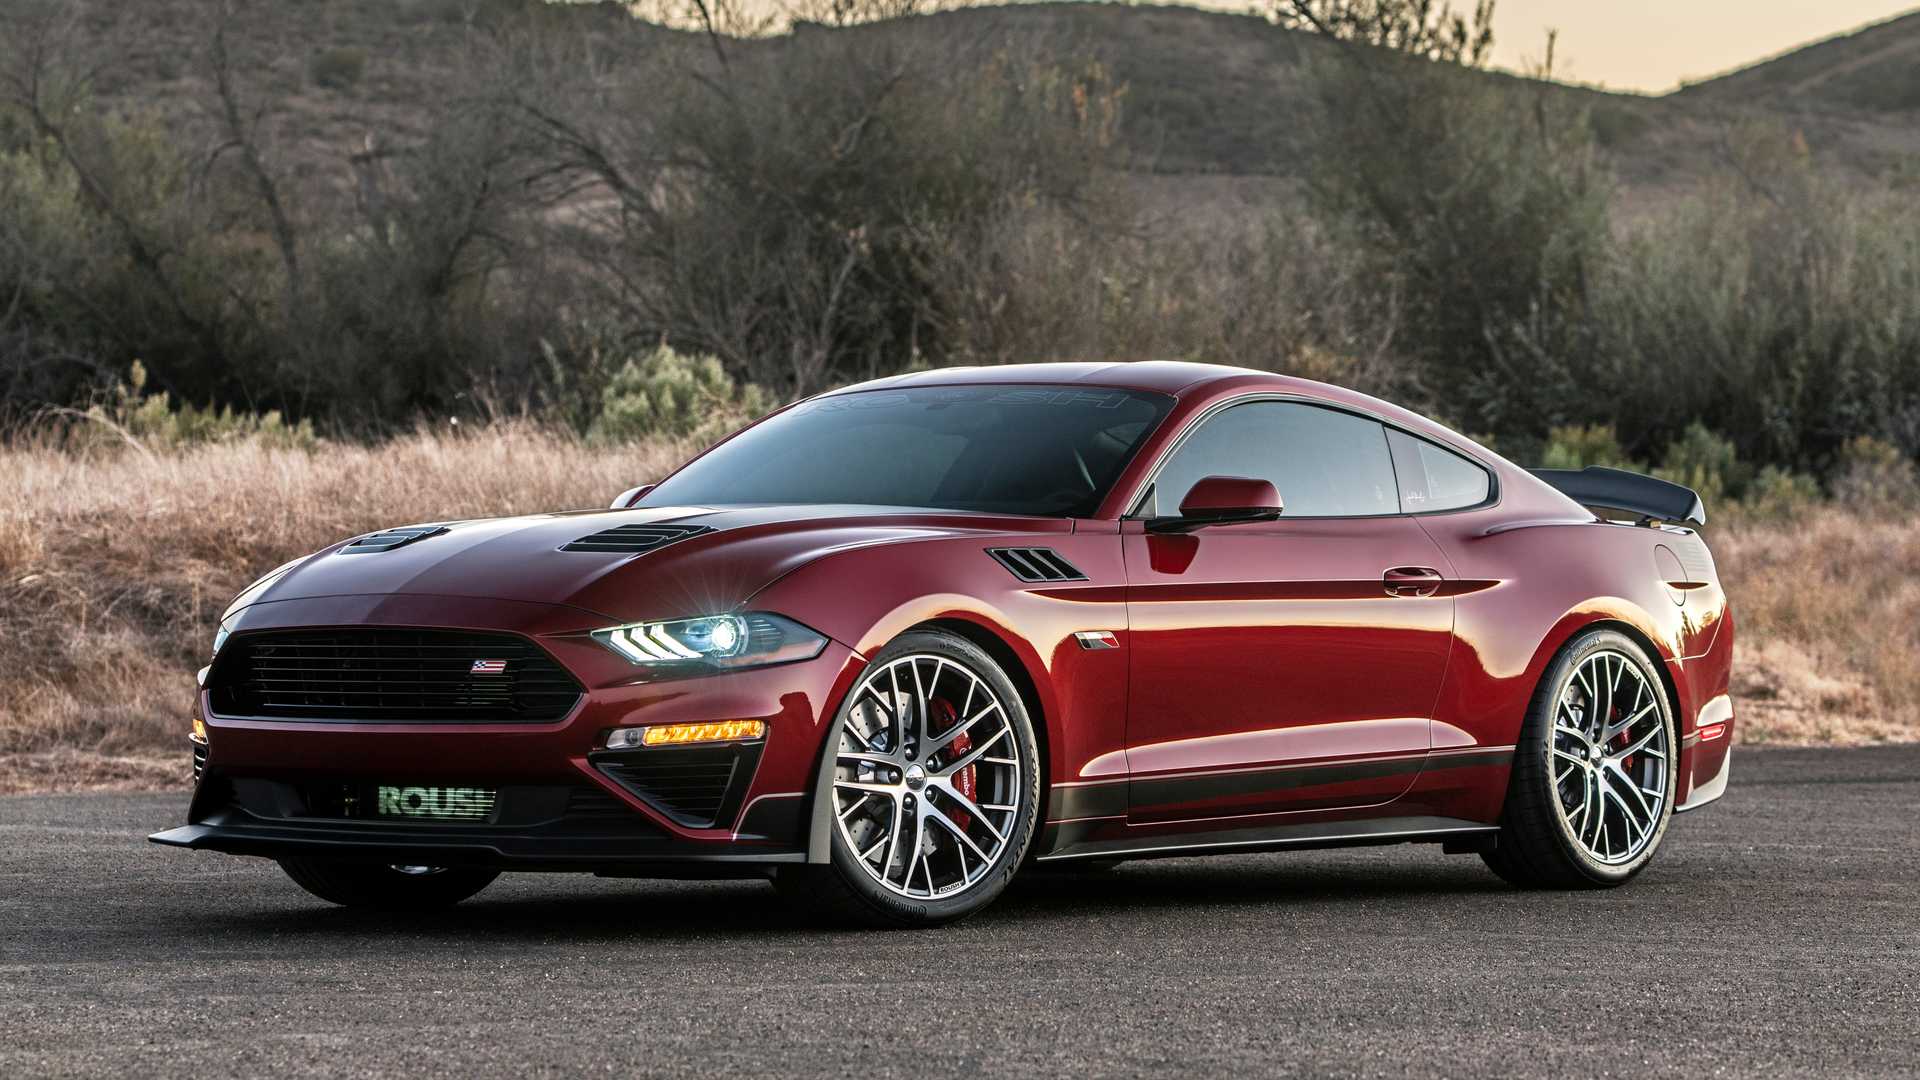 Stuwkracht amateur zoete smaak Jack Roush Couldn't Stop Signing This 775-HP Ford Mustang - autoevolution